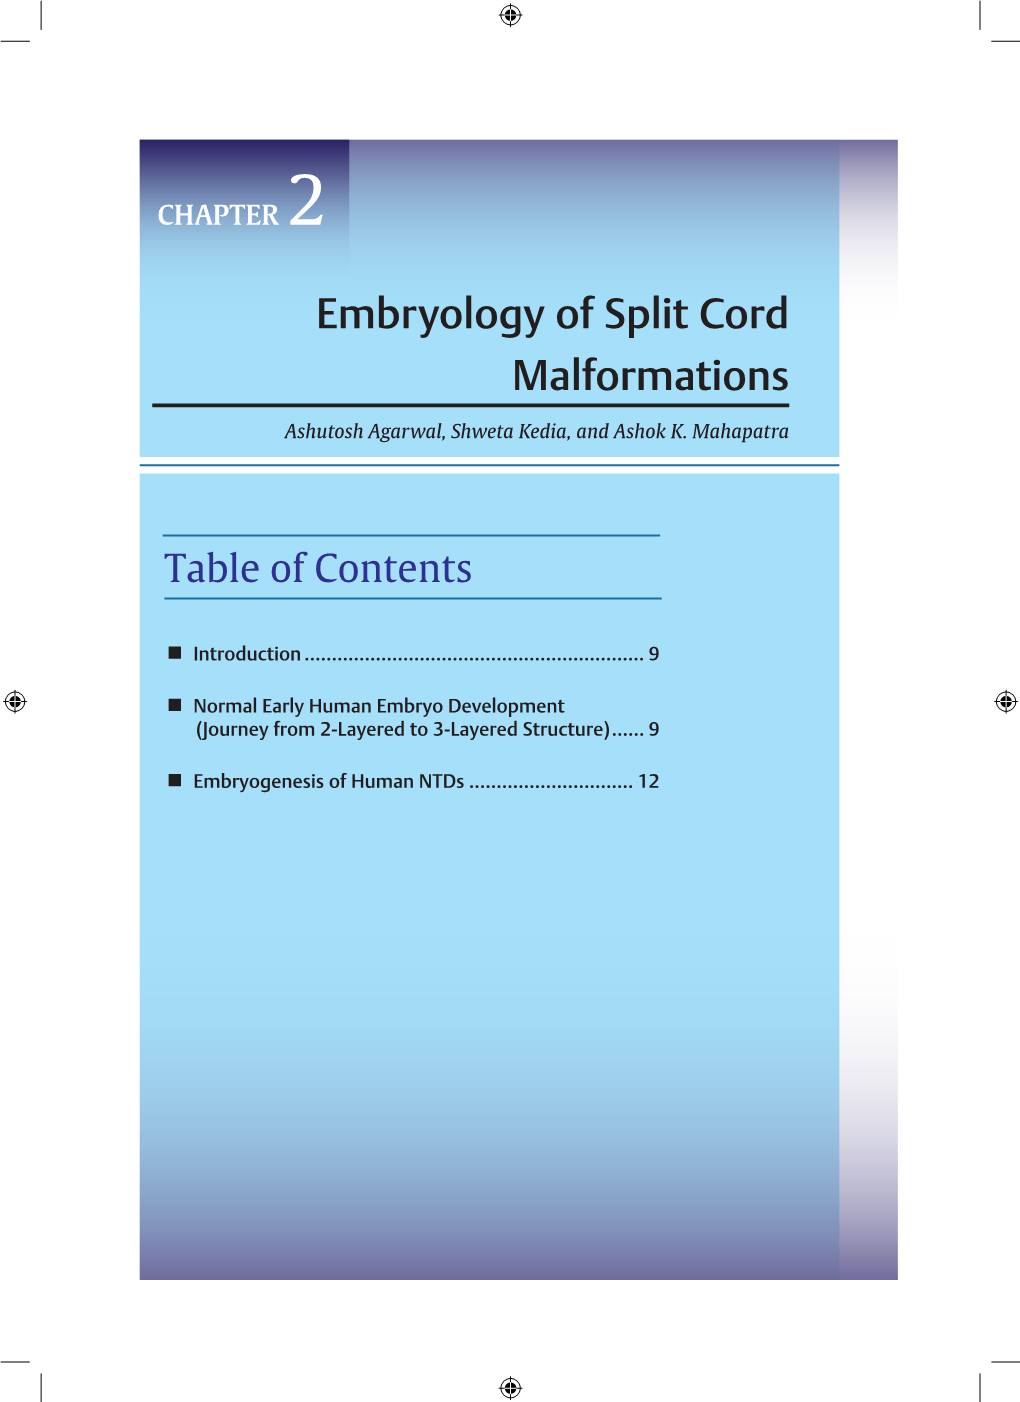 Embryology of Split Cord Malformations